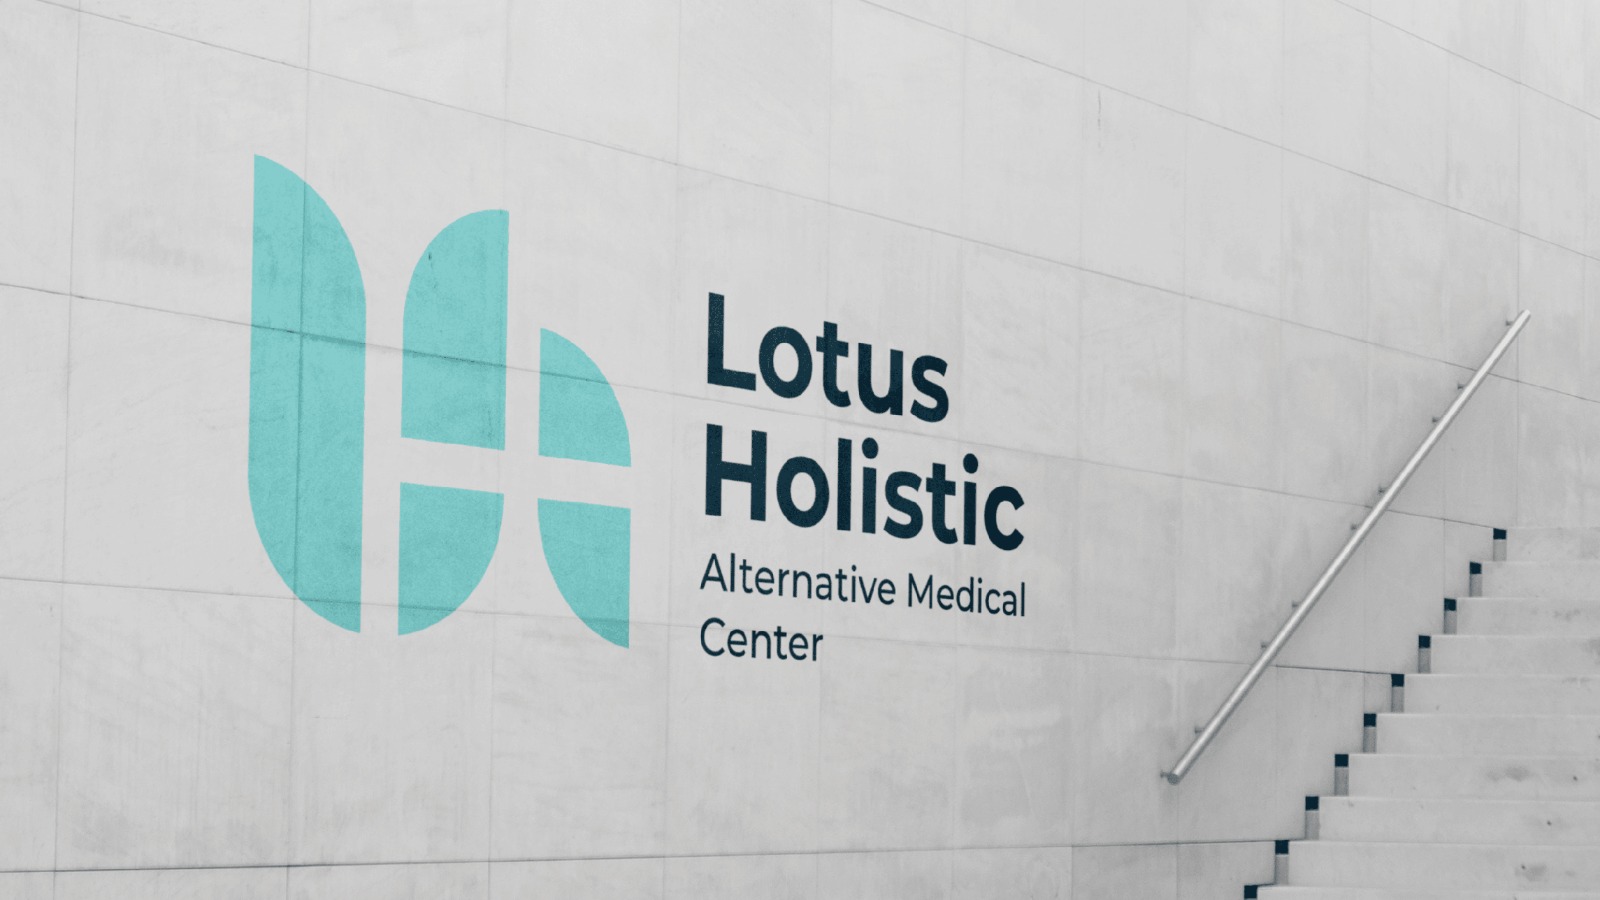 Lotus Holistic Unveils Rebranding in Partnership with Aimstyle